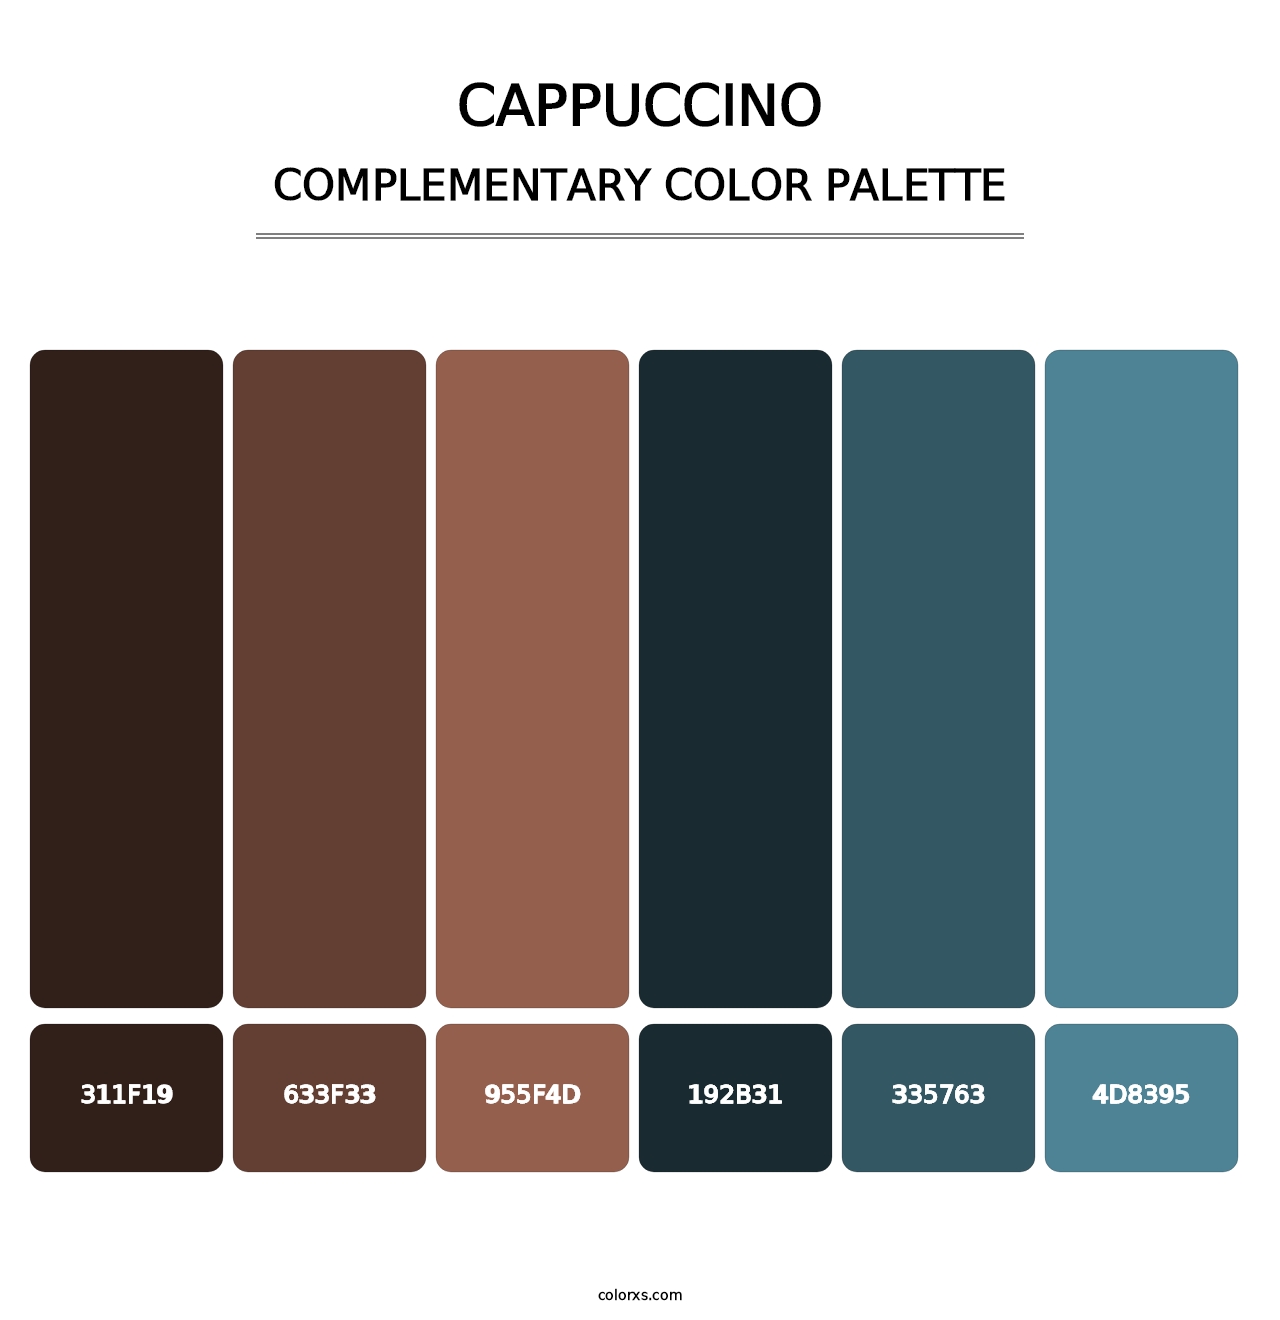 Cappuccino - Complementary Color Palette